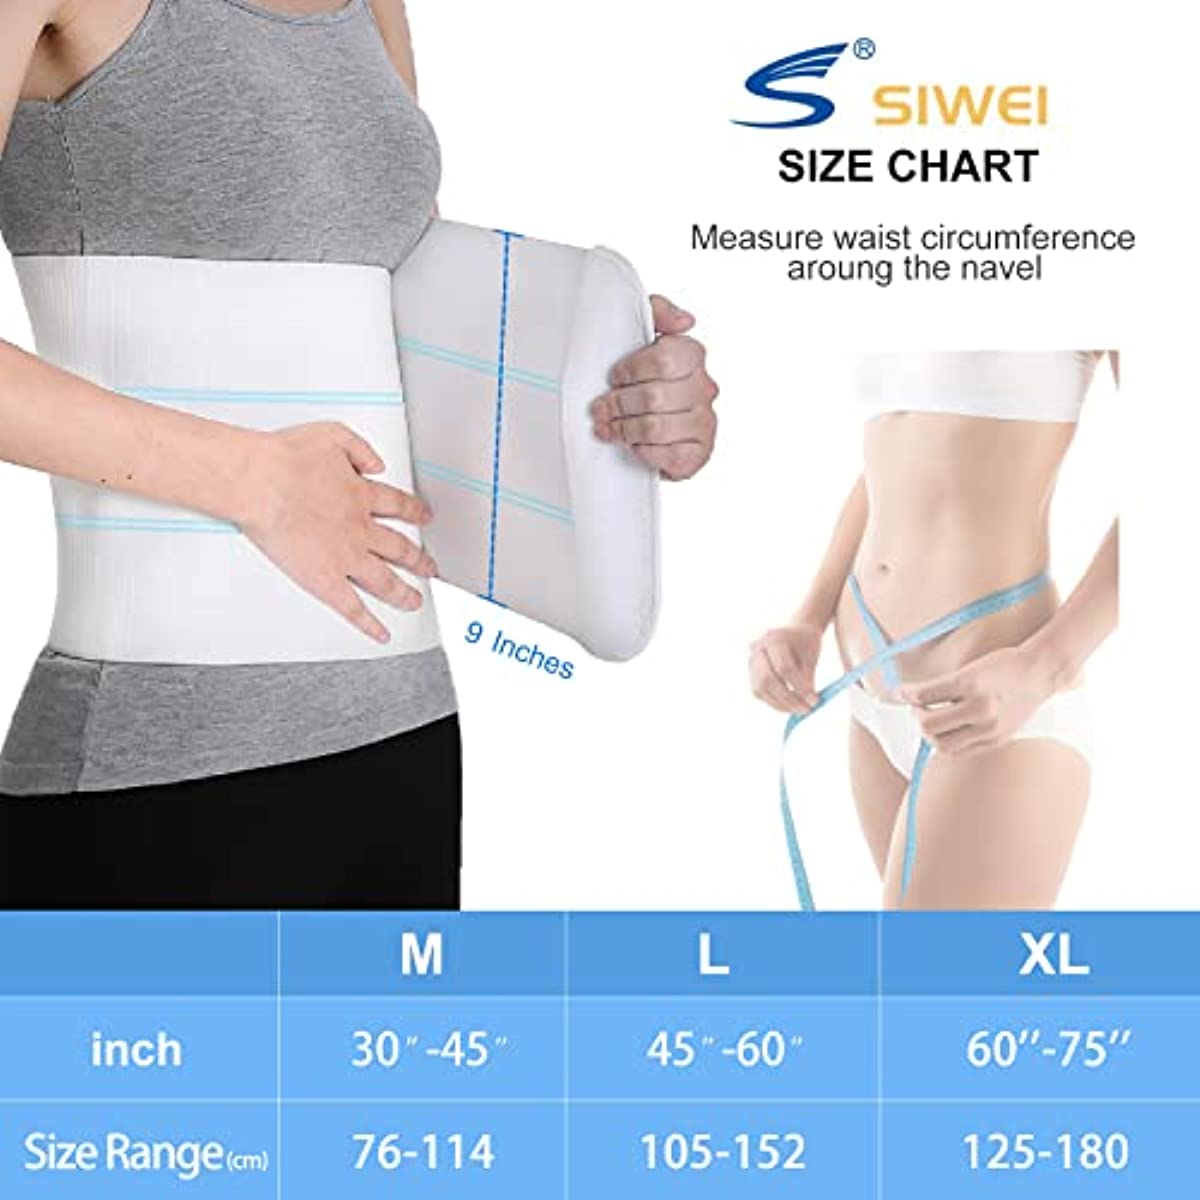 Abdominal Binder Post Surgery for Men and Women, Postpartum Tummy Tuck Belt Provides Slimming Bariatric Stomach Compression,High Elasticity, Breathable - (45\" - 60\") 3 PANEL - 9\"